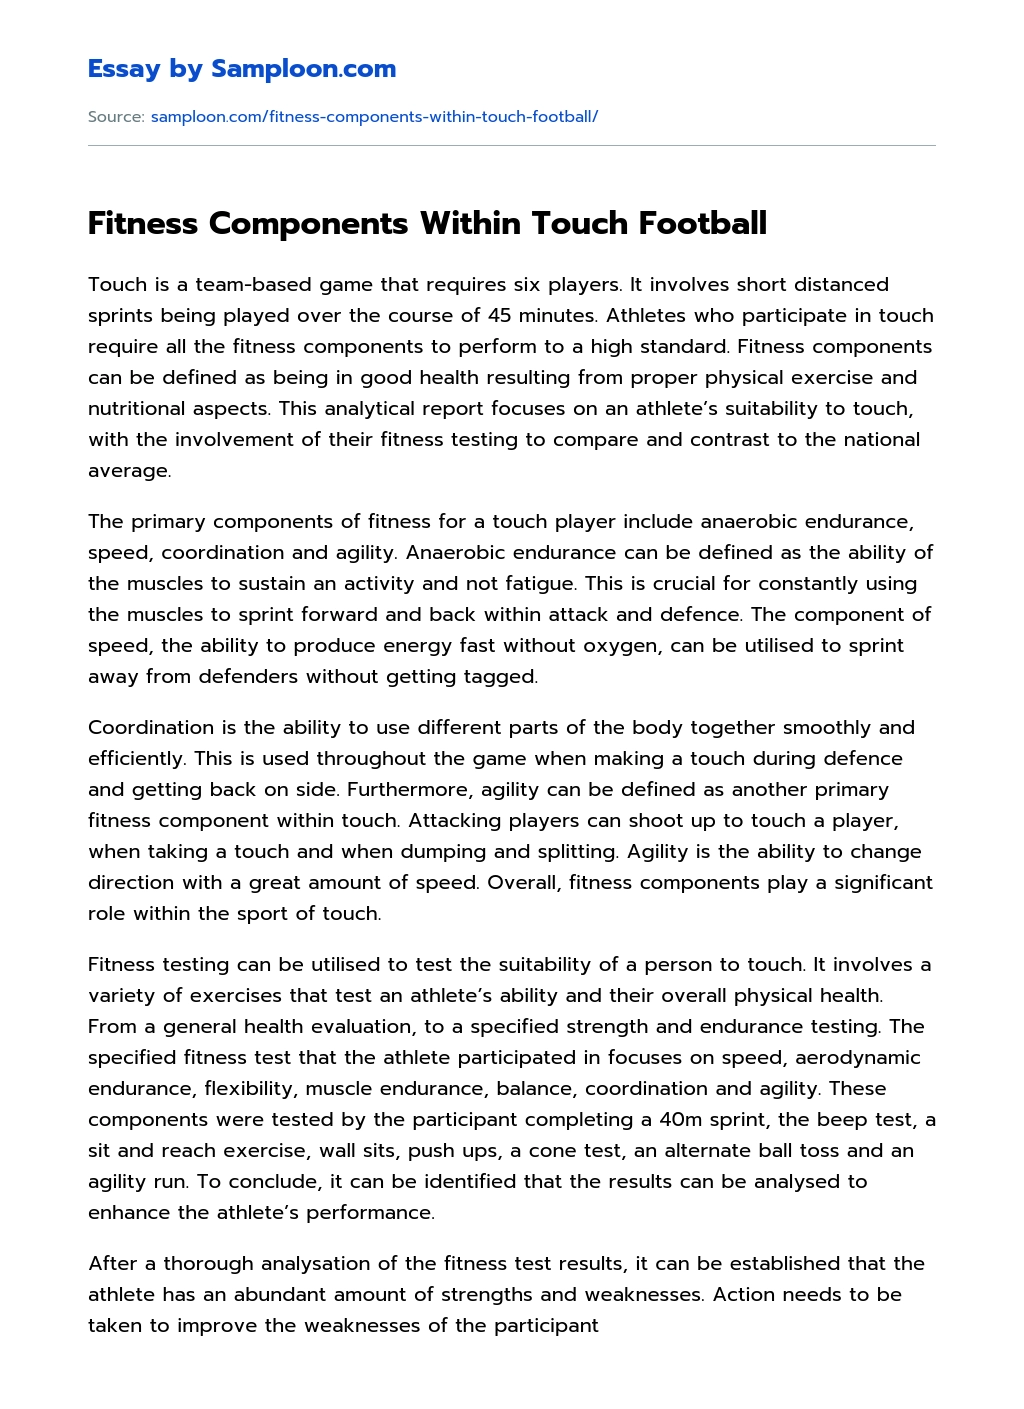 Fitness Components Within Touch Football essay